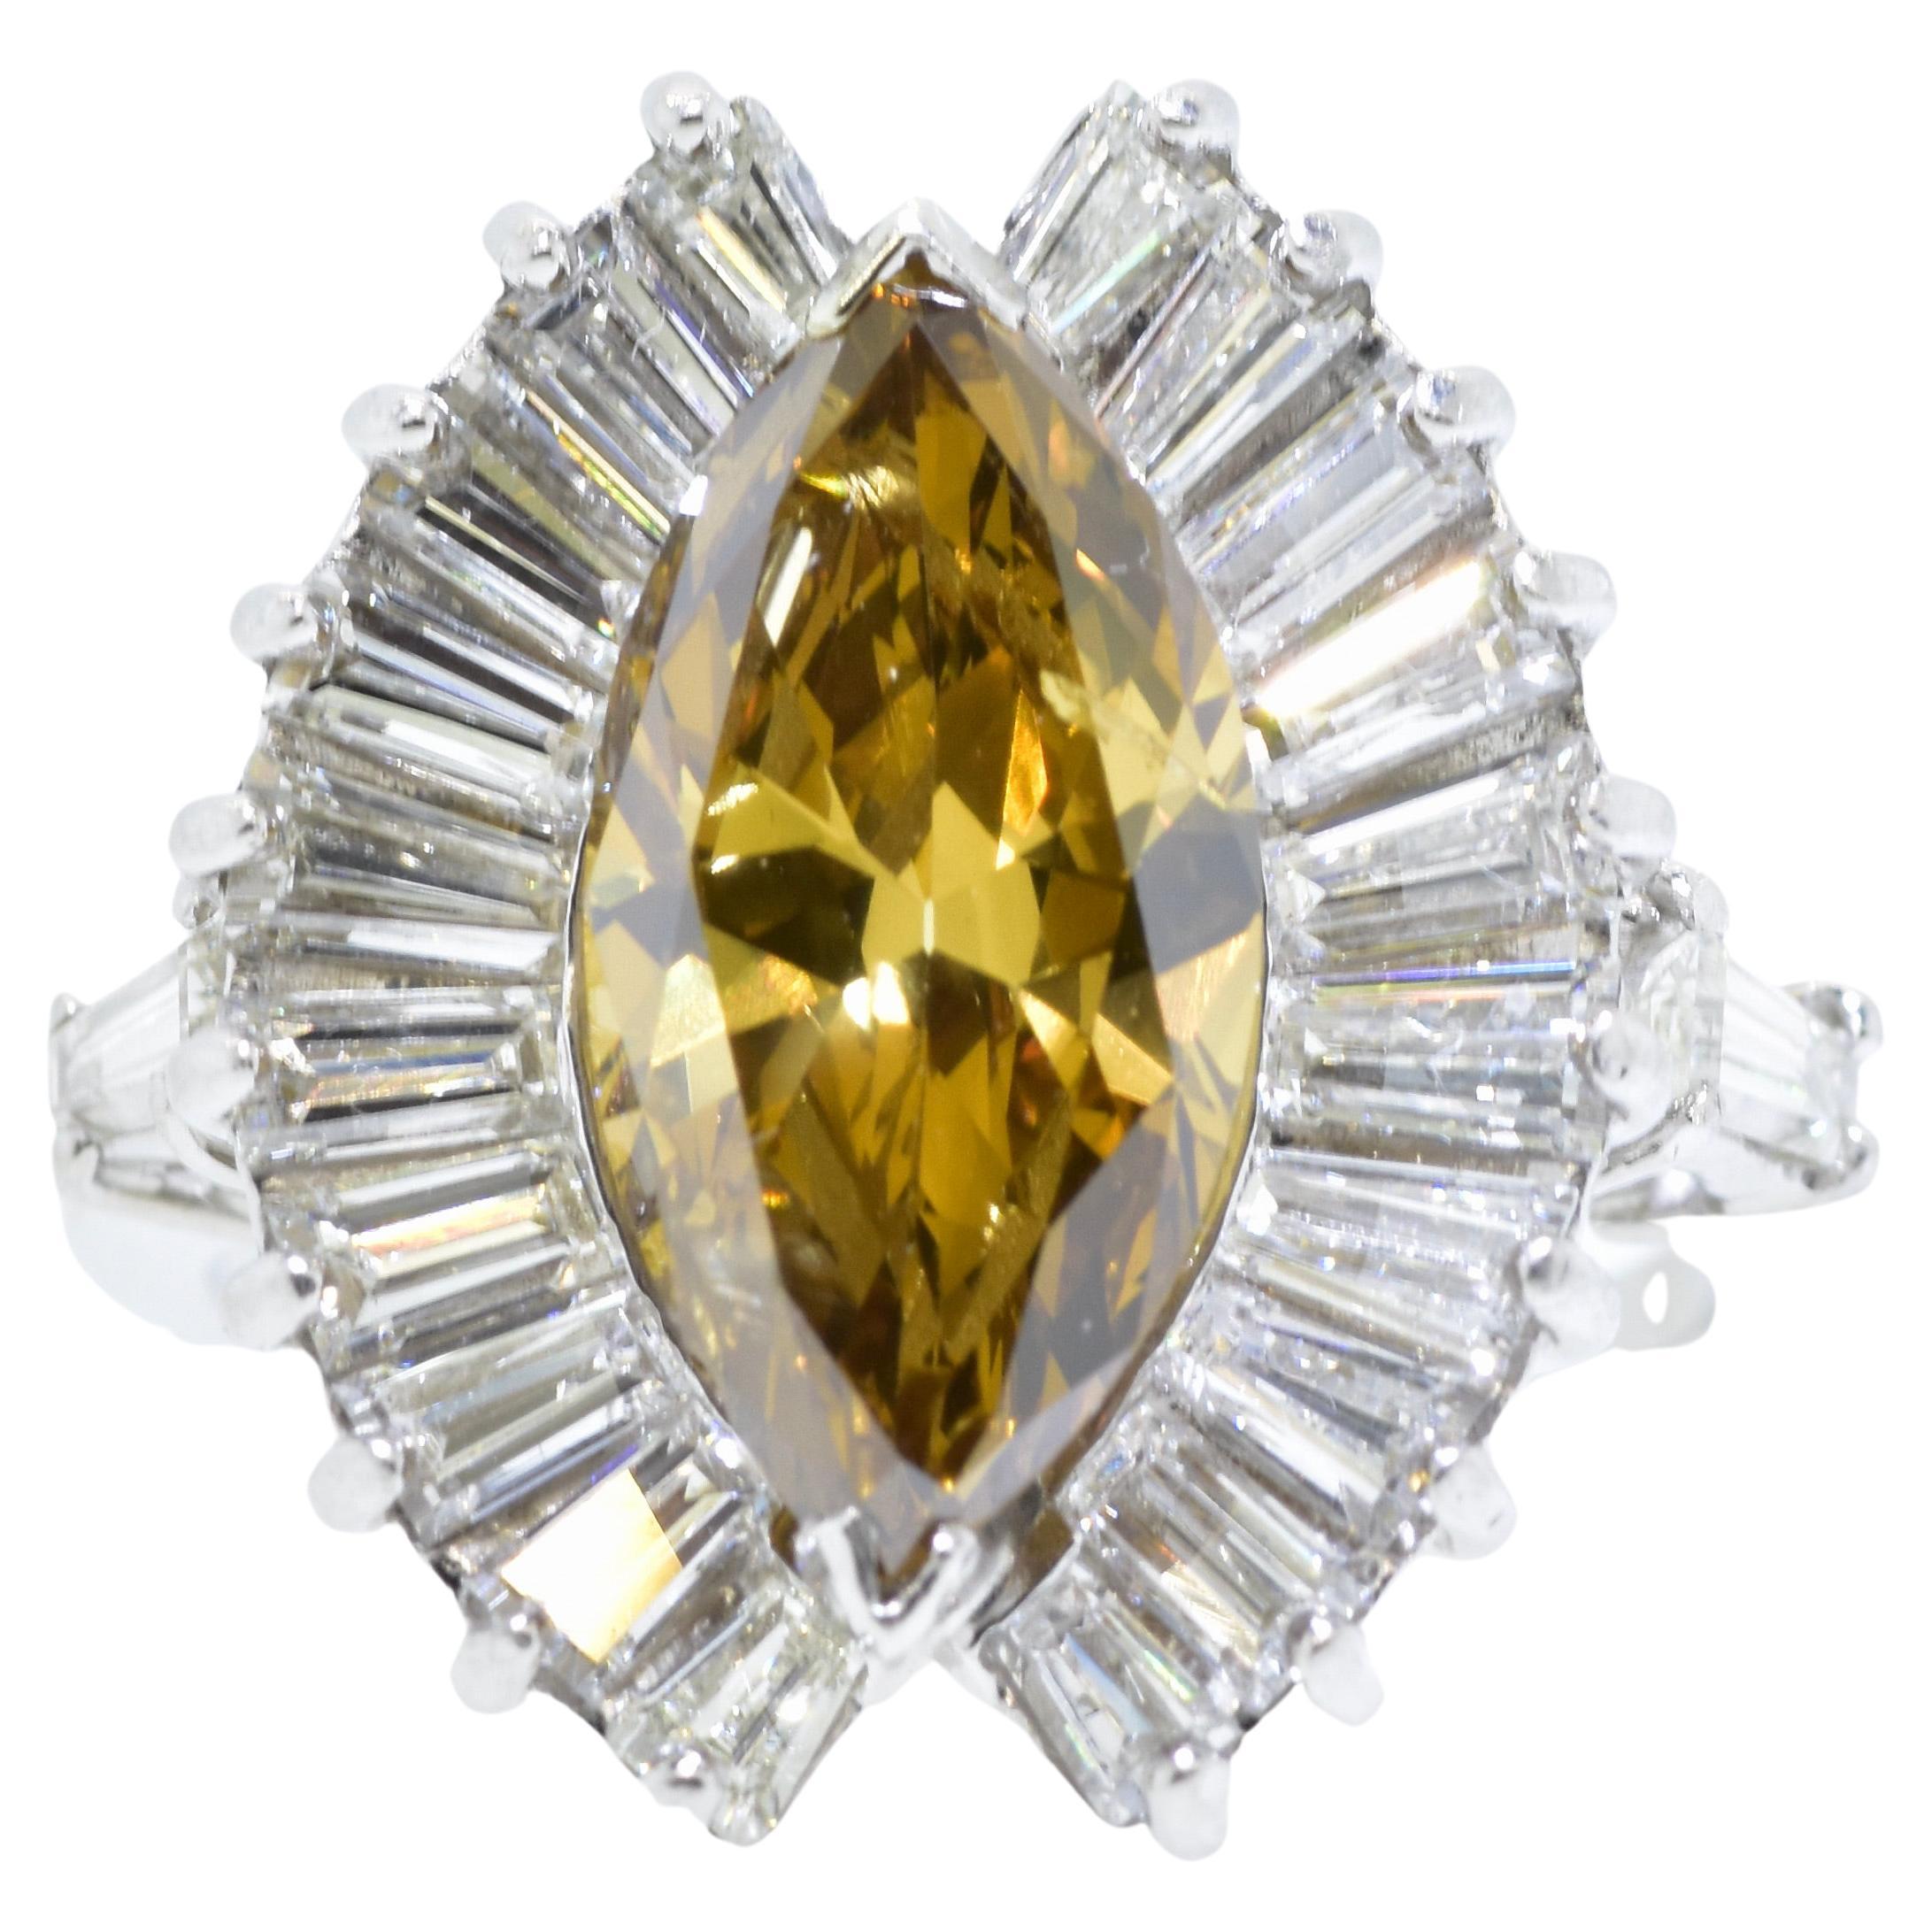 GIA 2.7 ct .natural yellowish brown marquis diamond with 1.5 cts of colorless tapered baguettes.  
The center marquis cut diamond has been examined by the Gemological Institute of America graded as a natural yellowish brown diamond weighing 2.7 cts.